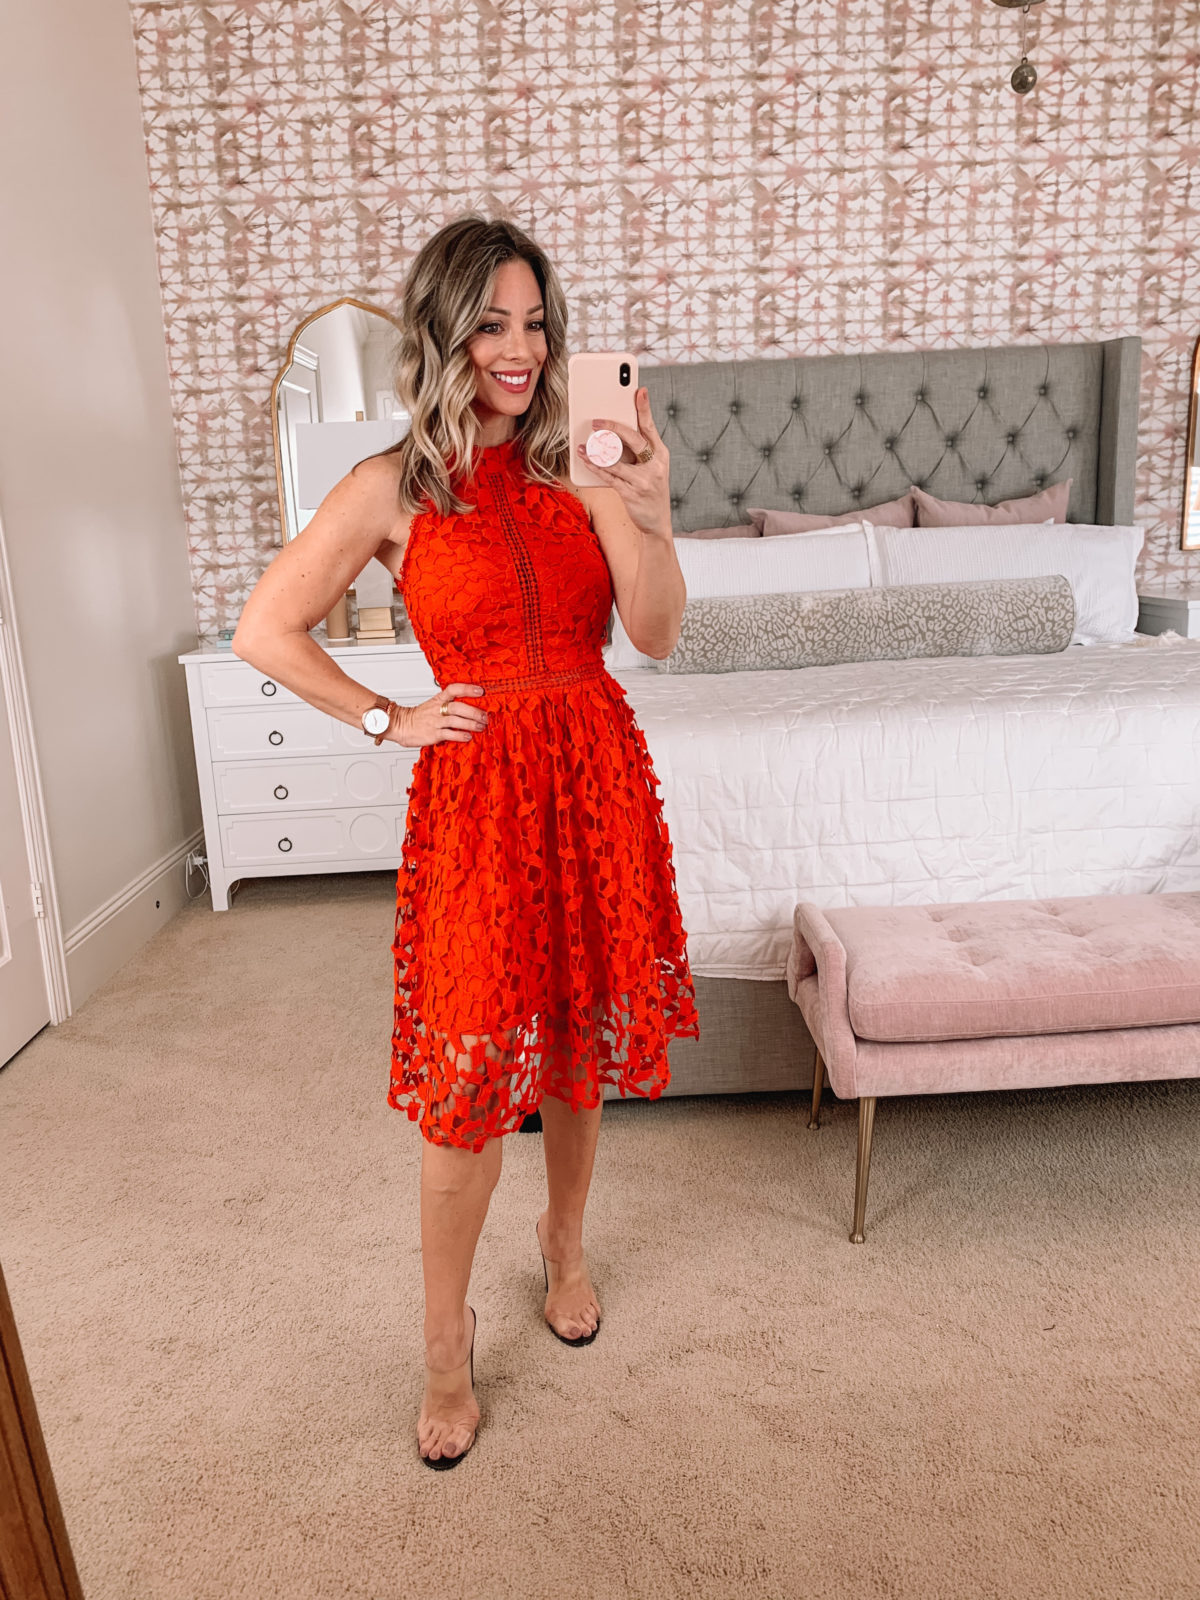 Amazon Fashion Faves, Red Lace Dress, Clear heels 